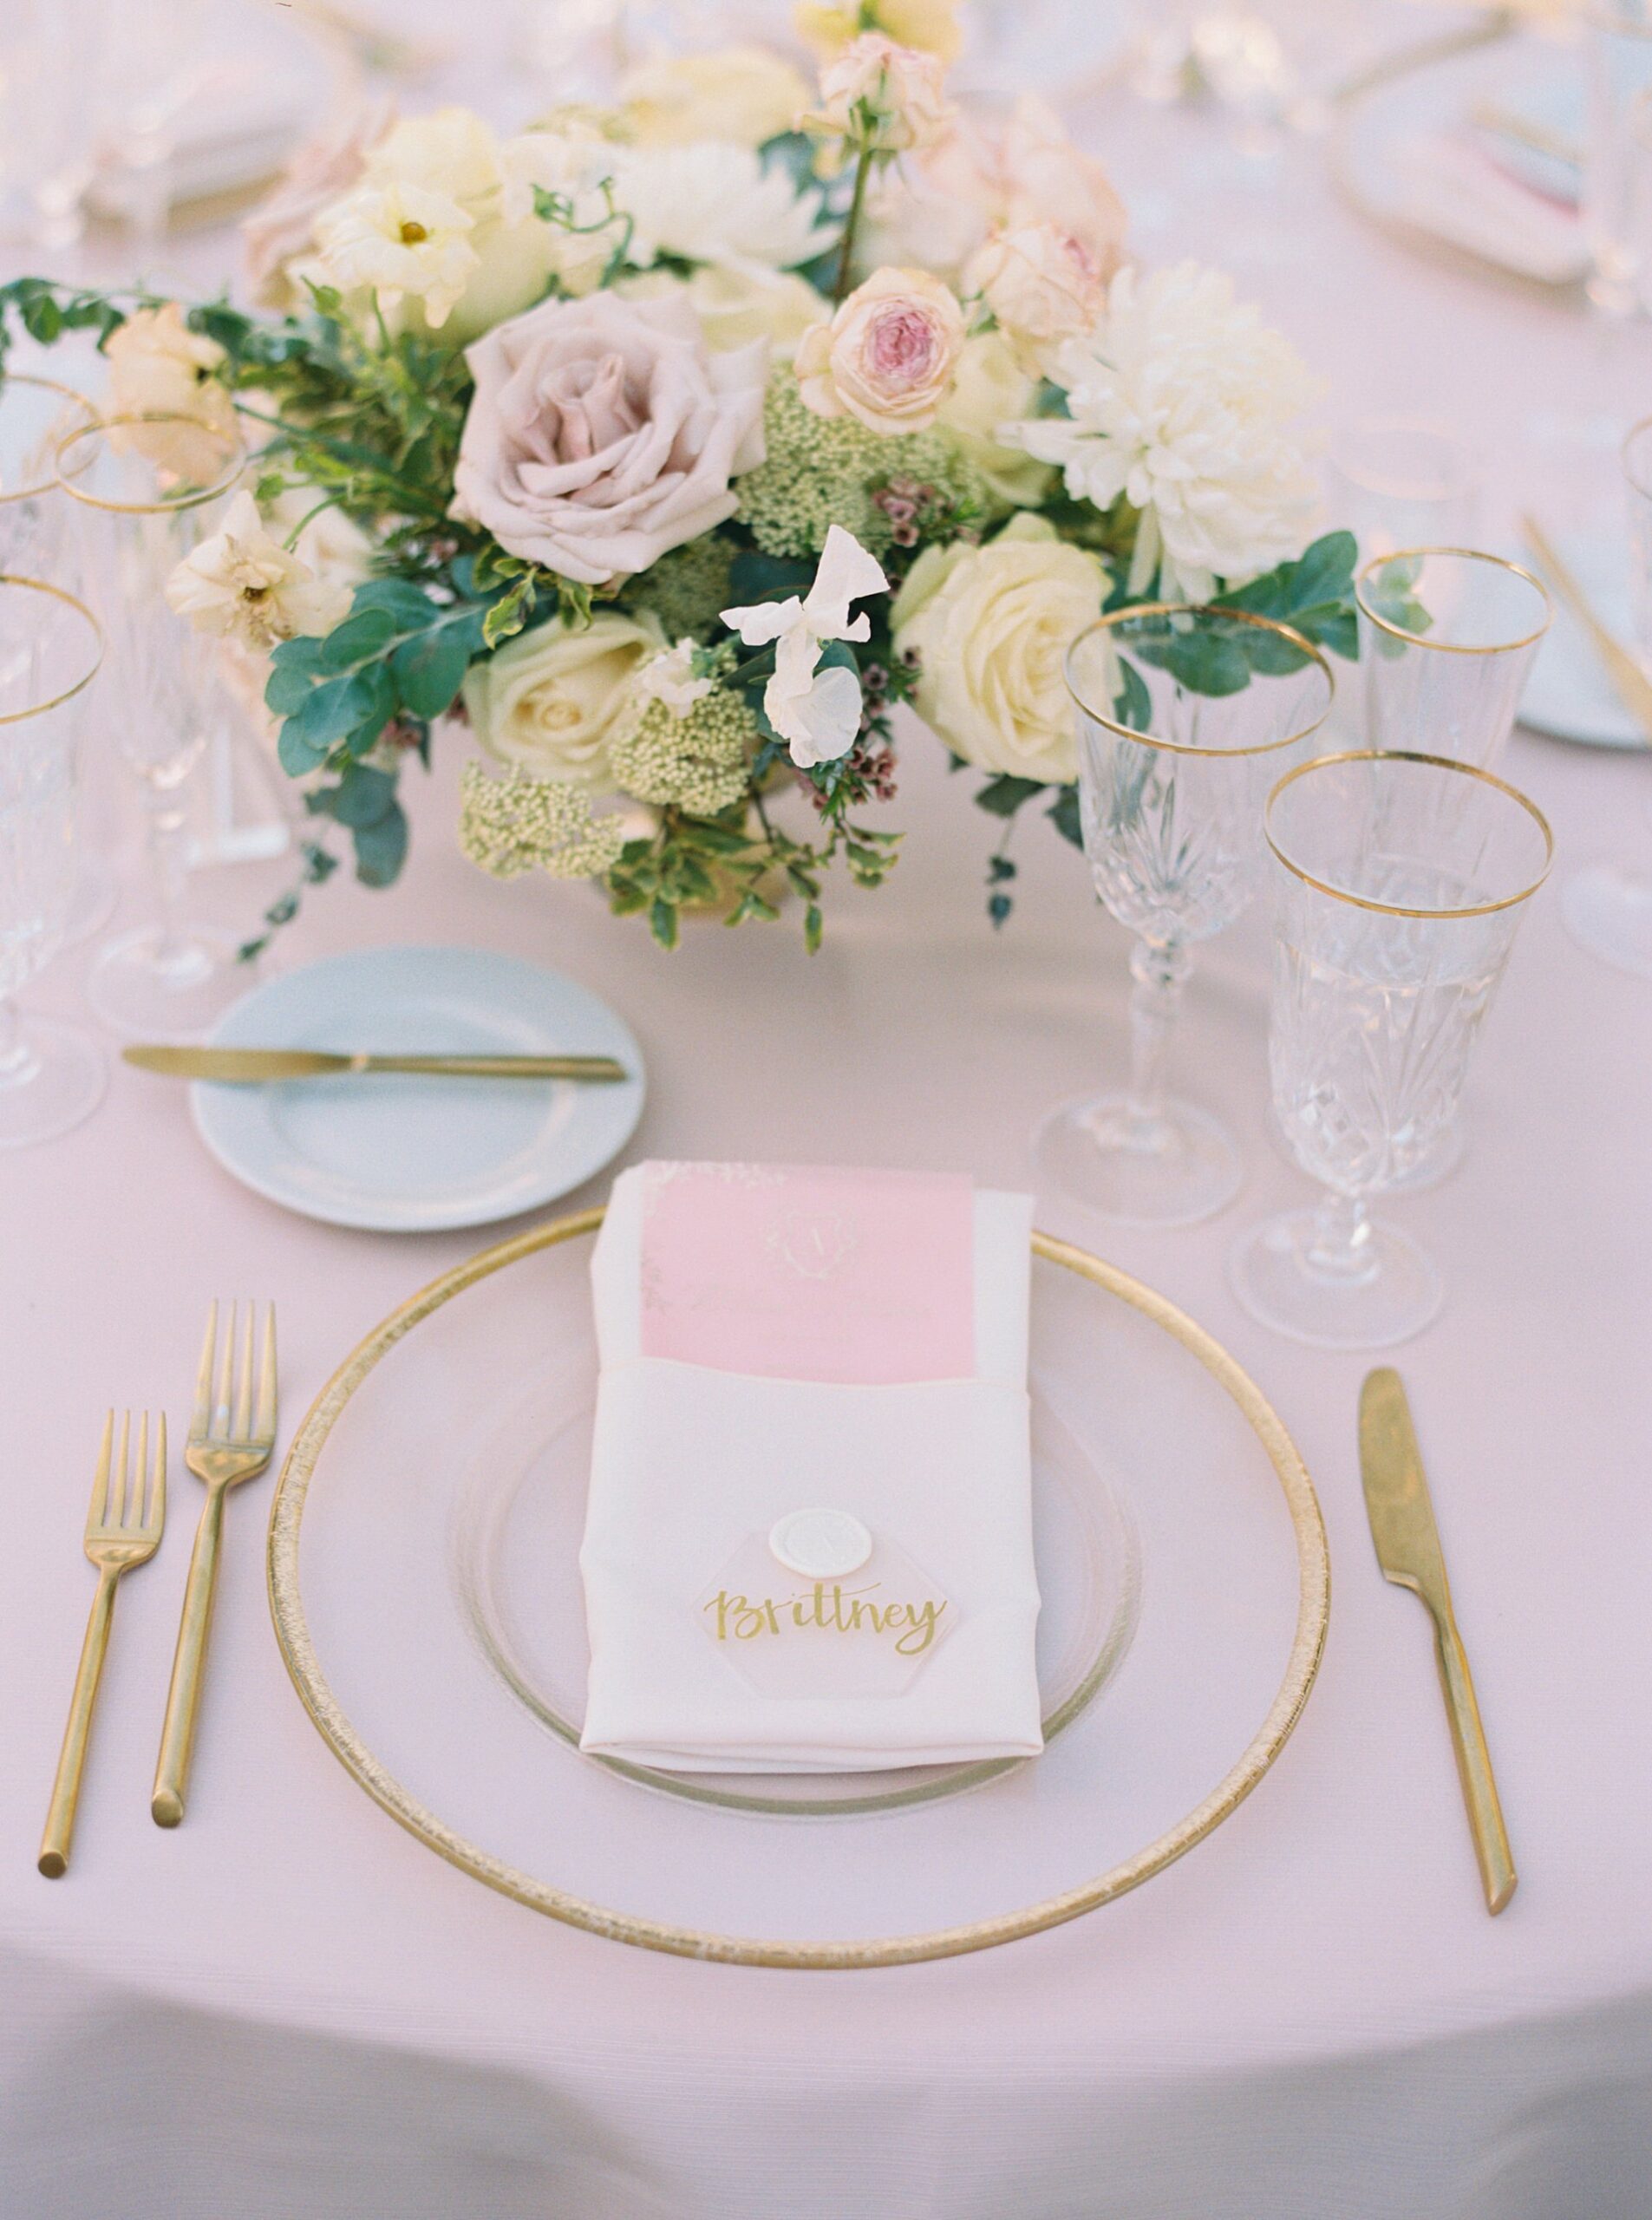 Table setting at La Cuesta Ranch Wedding Designed by Janet Tacy of San Luis Obispo Wedding Planner Sandcastle Celebrations captured by Jen Rodriguez Photography